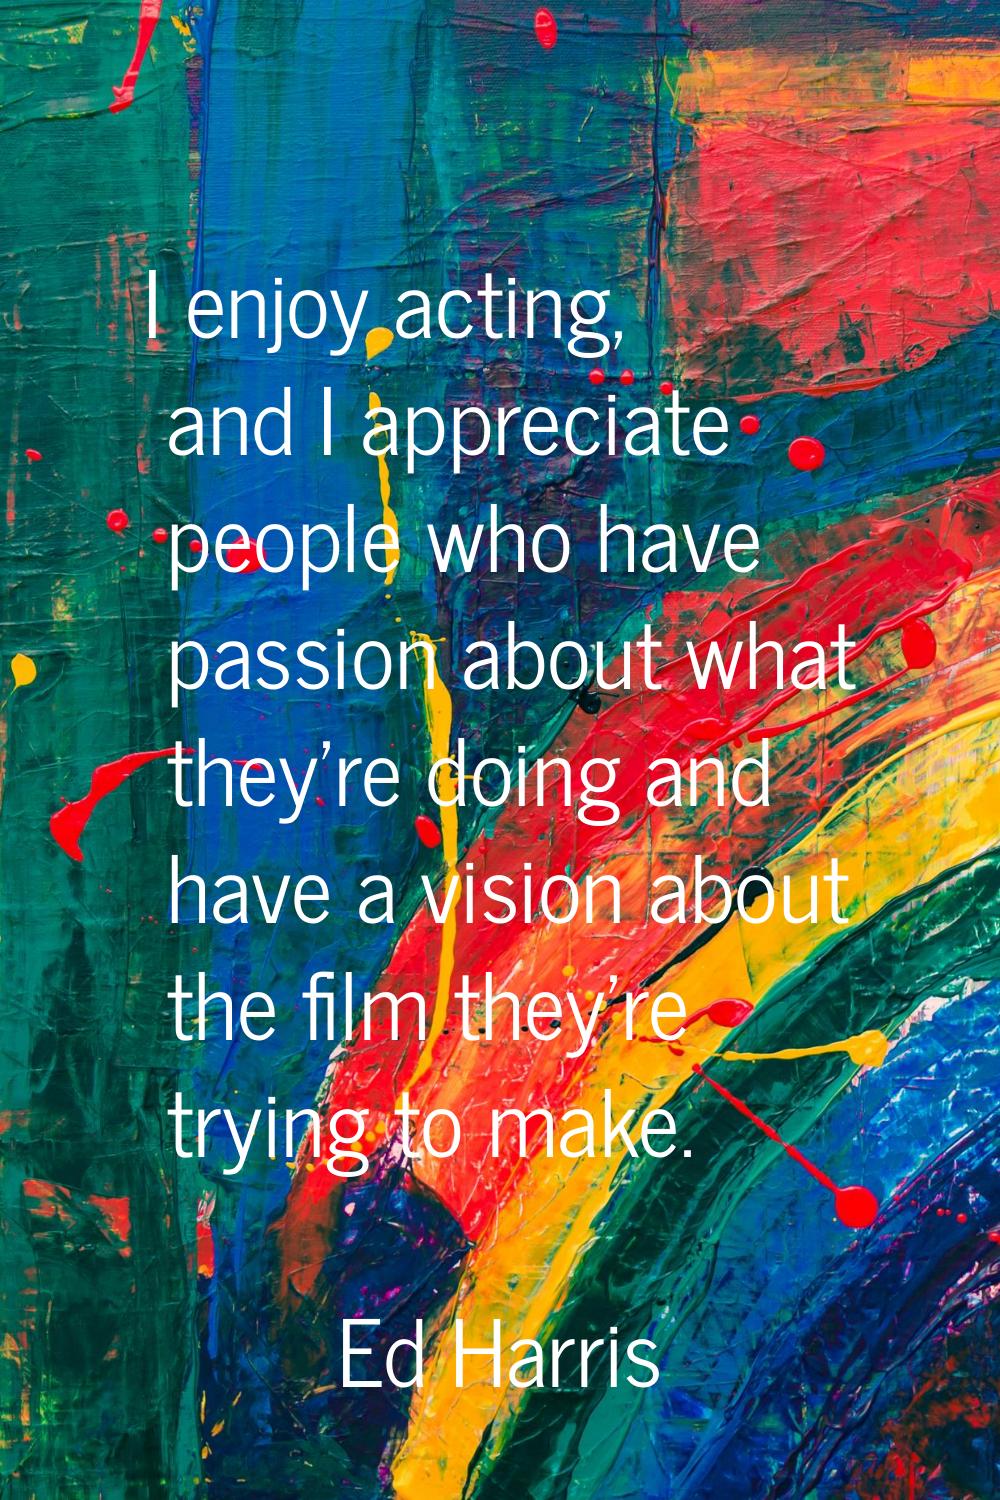 I enjoy acting, and I appreciate people who have passion about what they're doing and have a vision